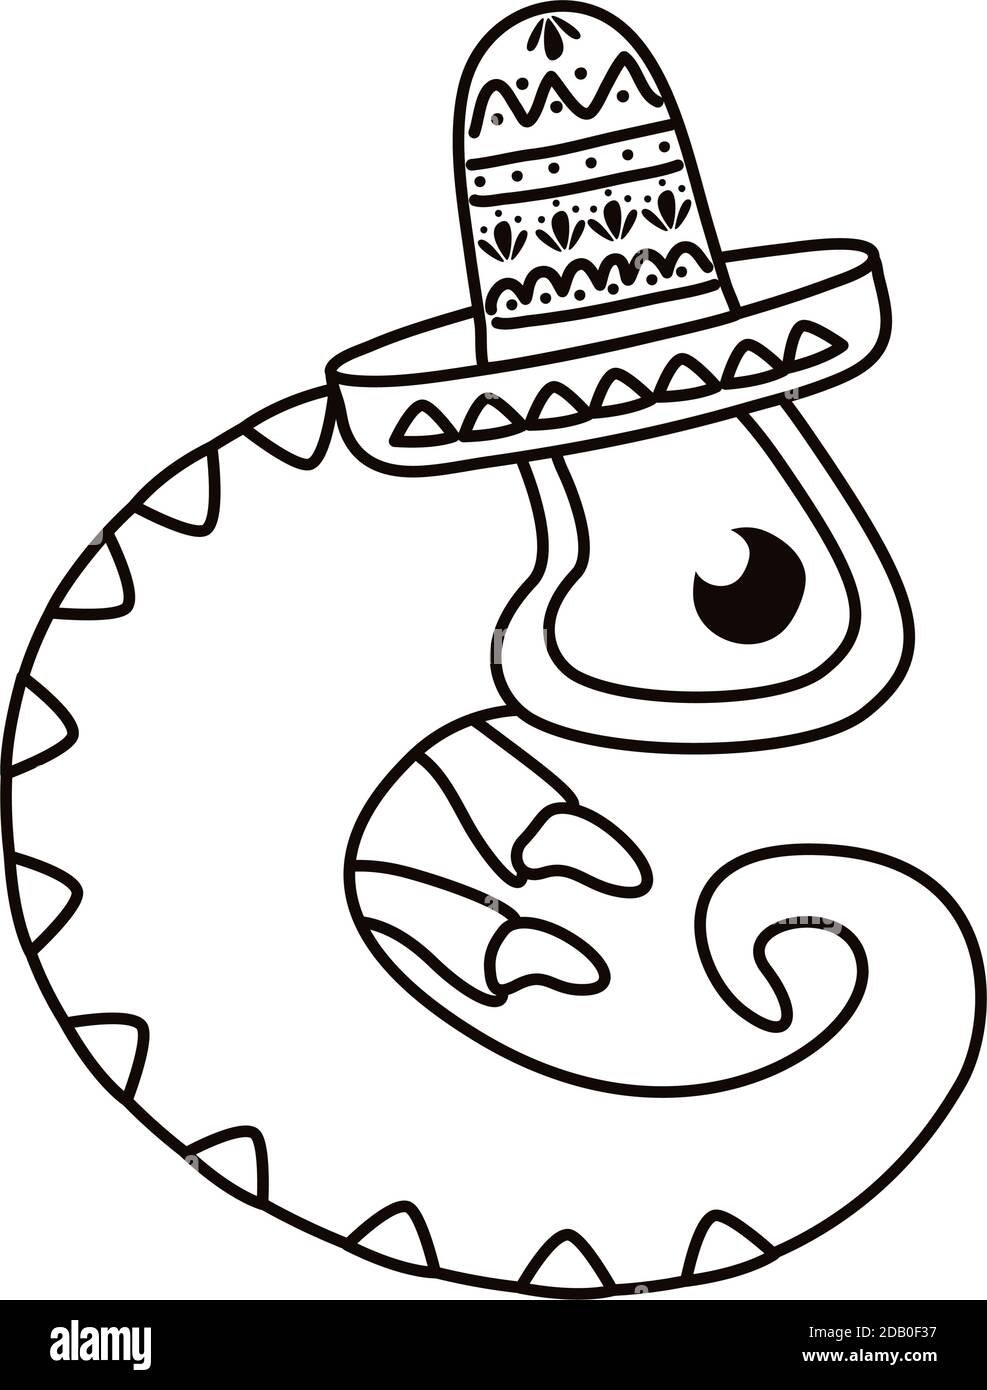 iguana with mexican hat culture line style vector illustration design Stock Vector